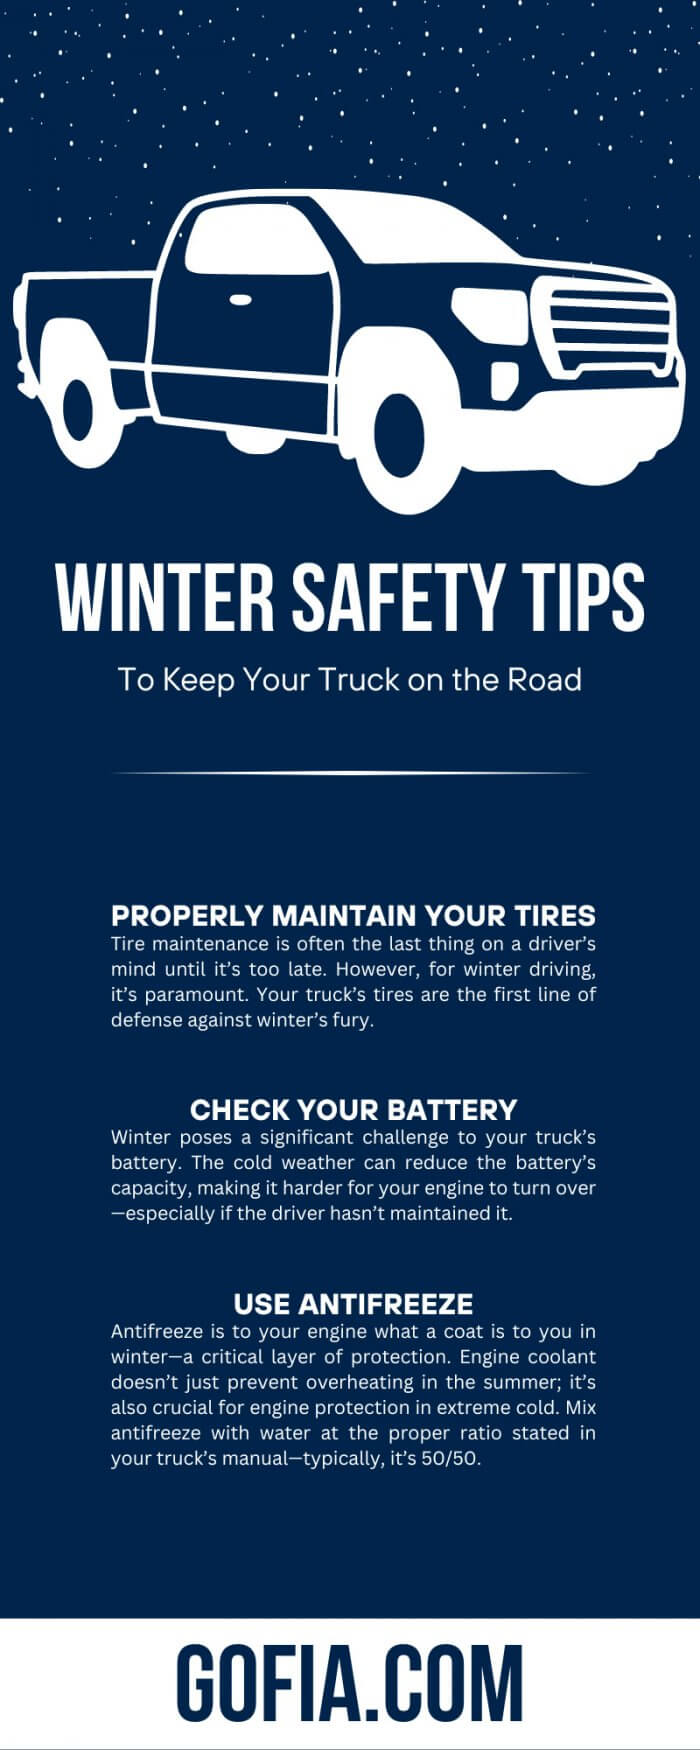 Winter Safety Tips To Keep Your Truck on the Road